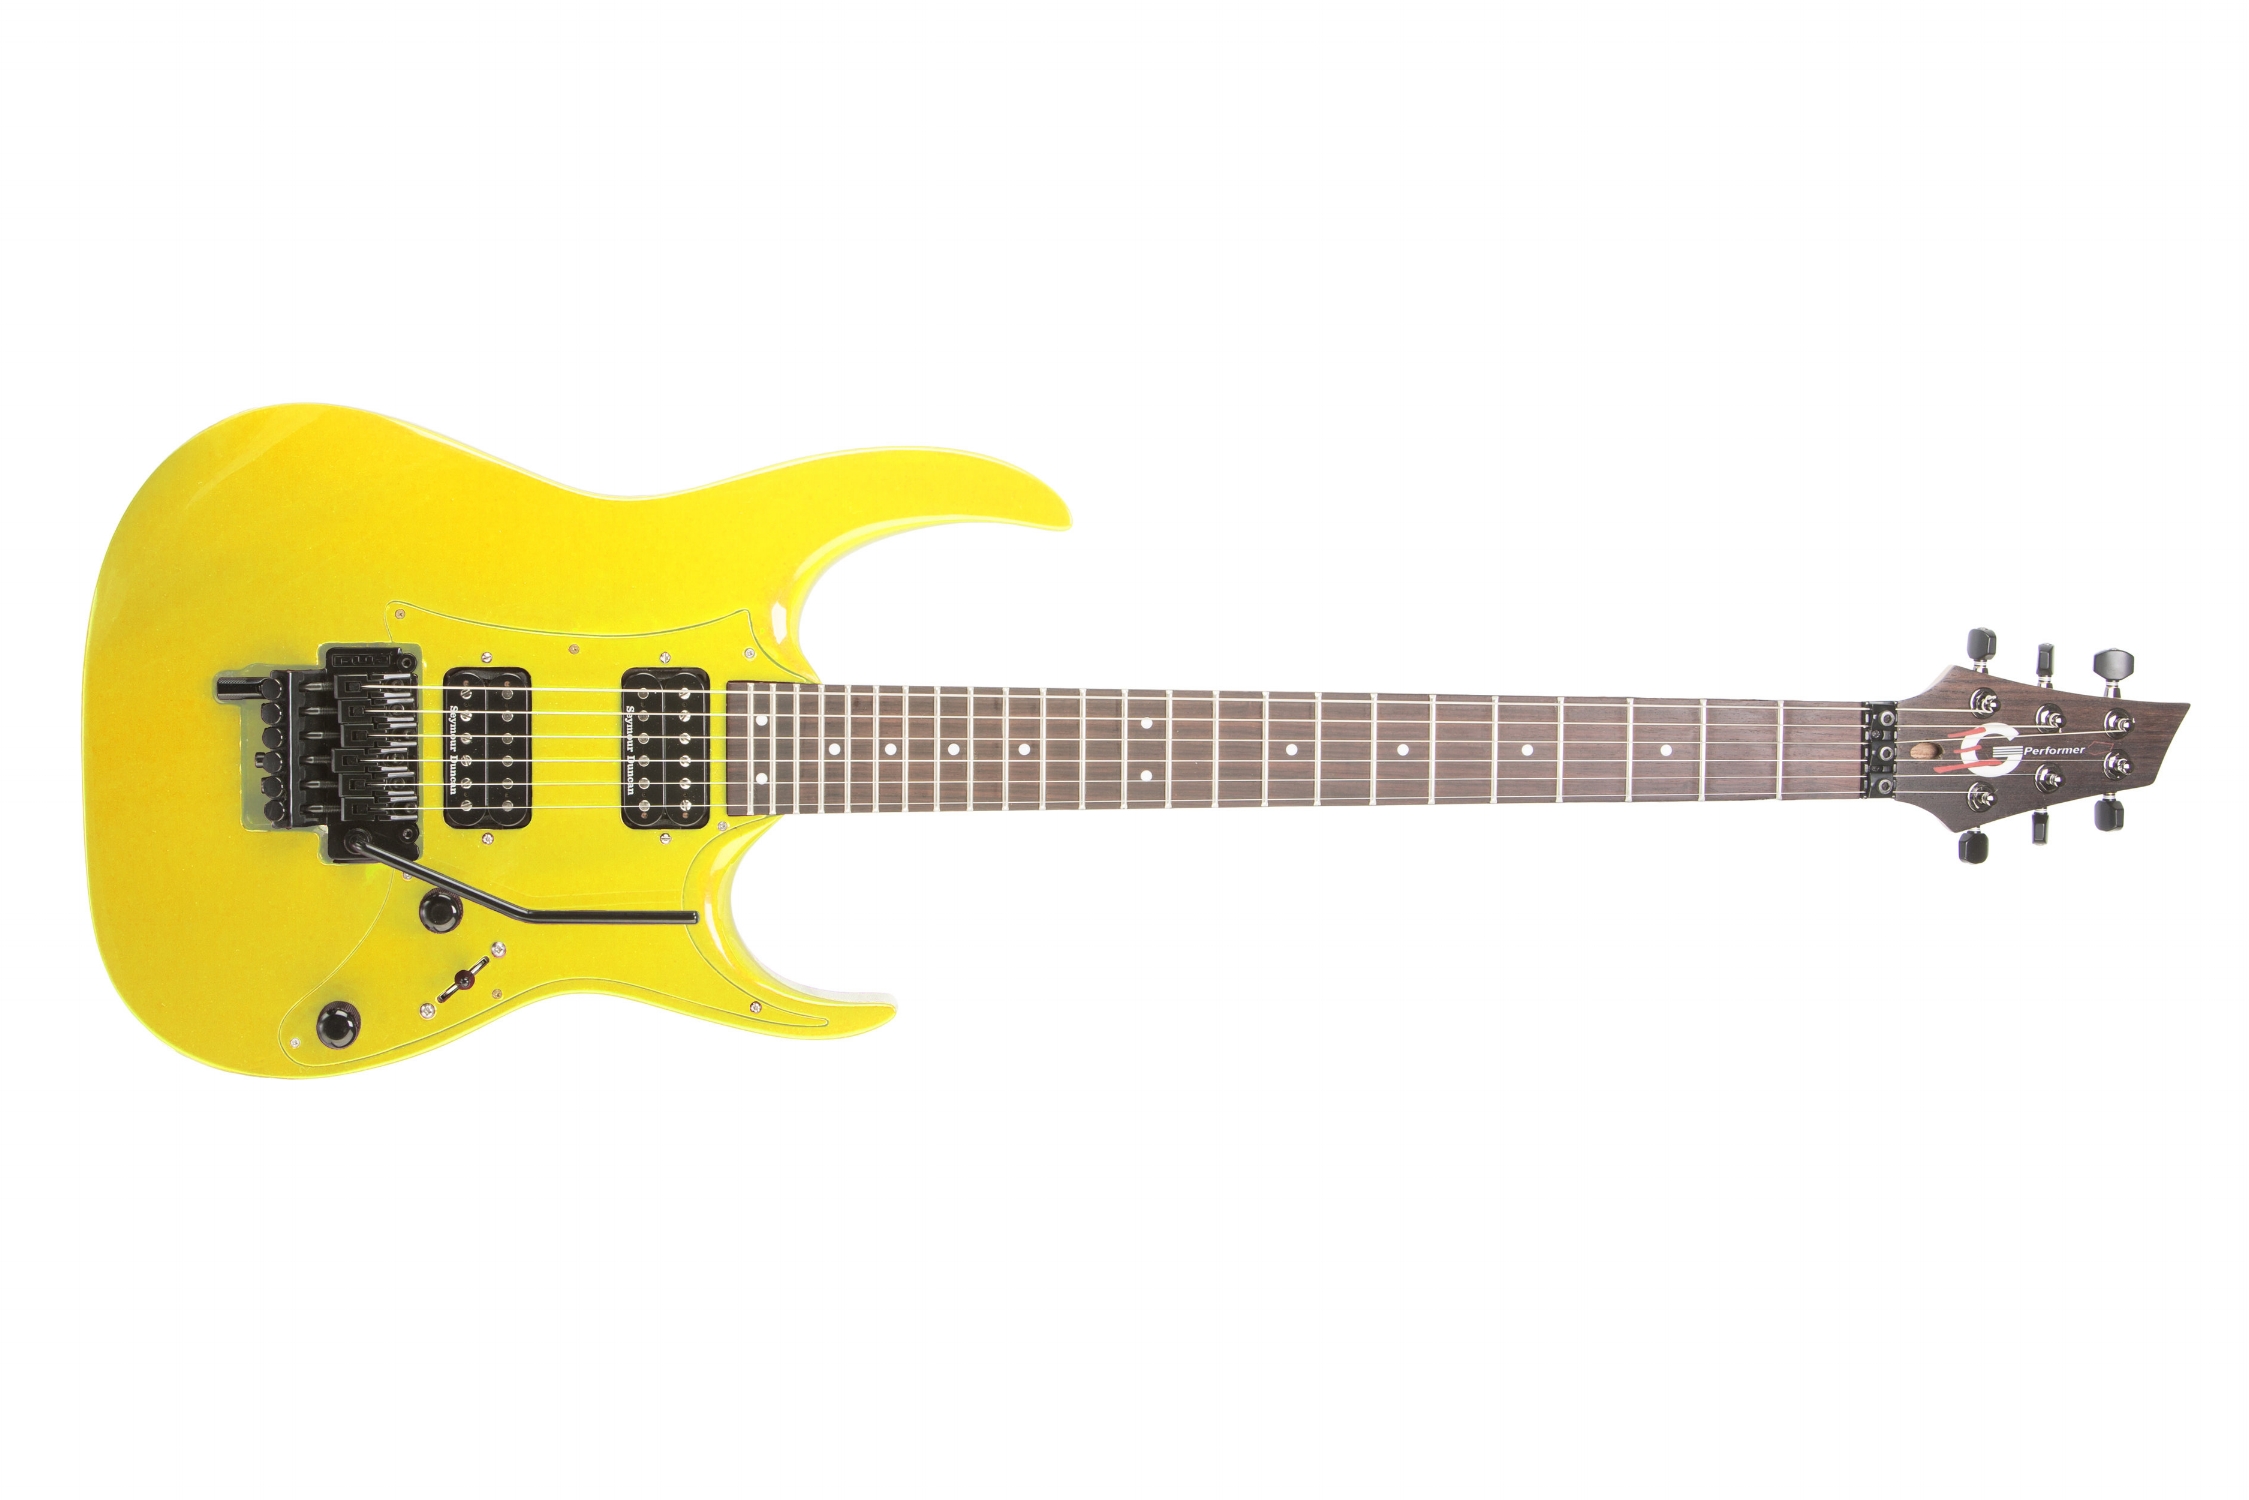 Performer Color Rendering Canary Yellow v2.jpg